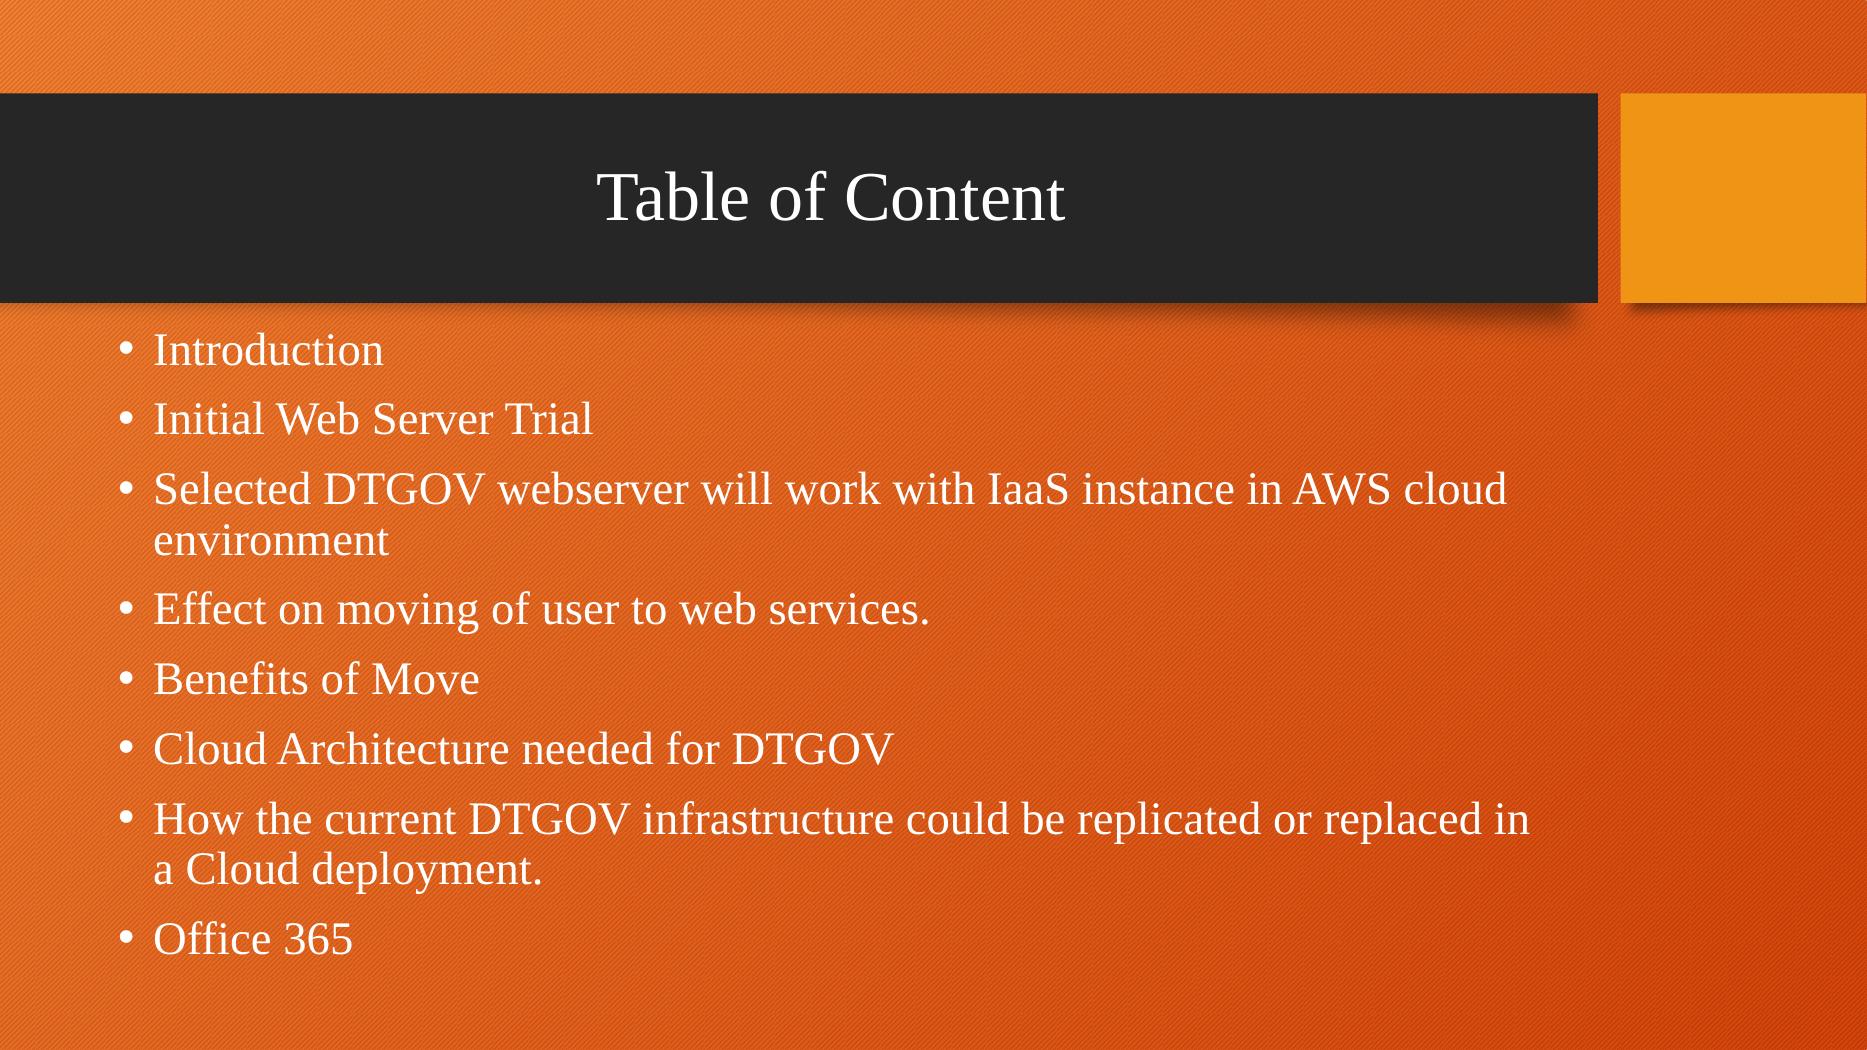 Migrating Web Servers to IaaS in AWS: Benefits, Architecture, and Challenges_2